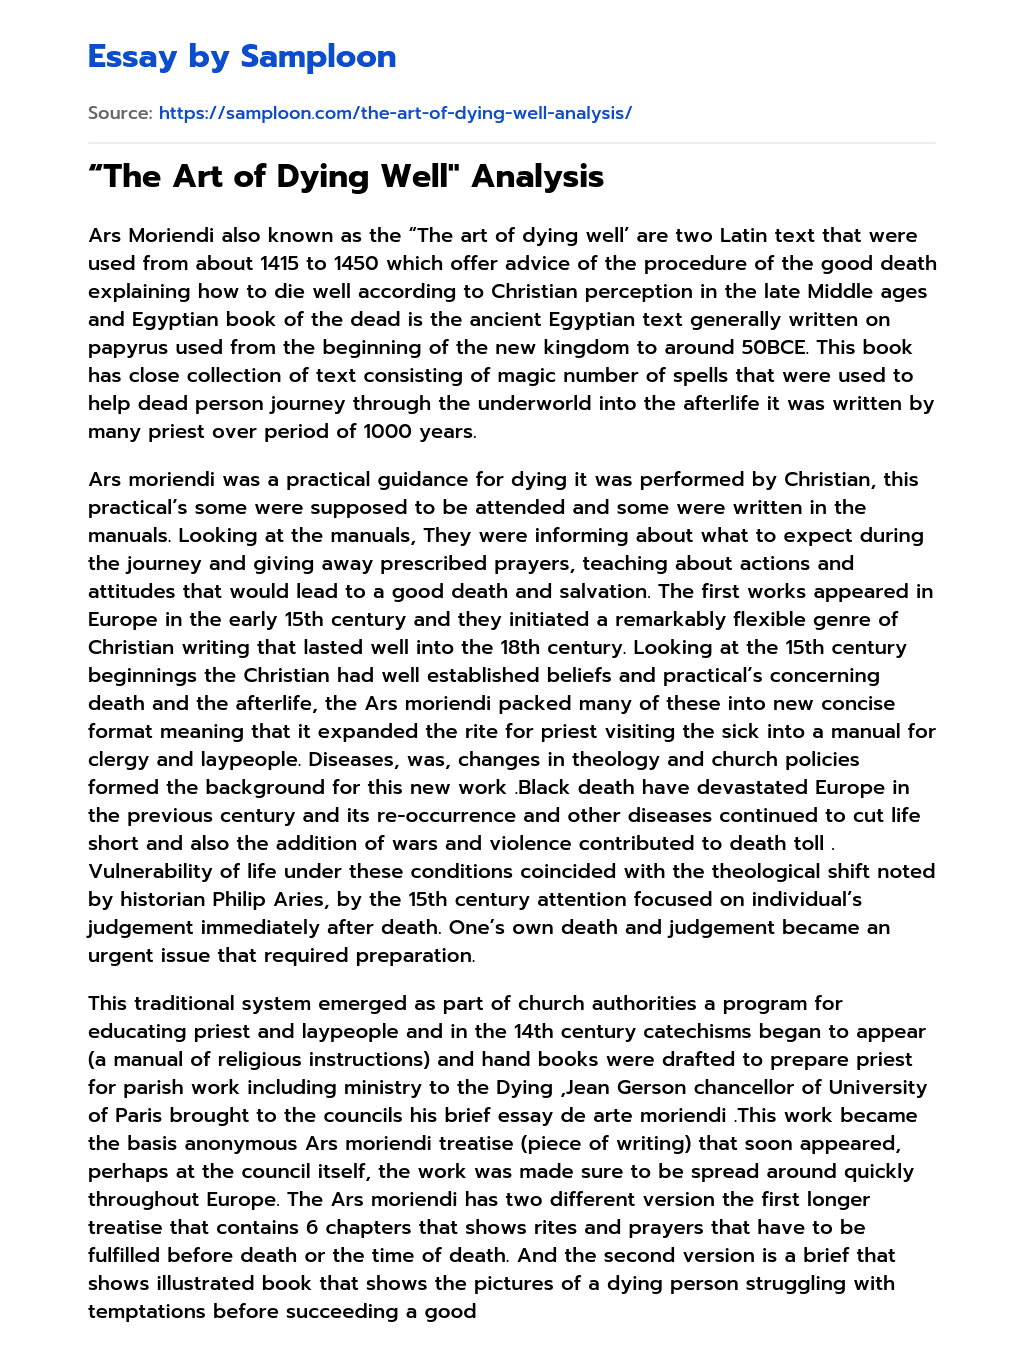 “The Art of Dying Well” Analysis essay